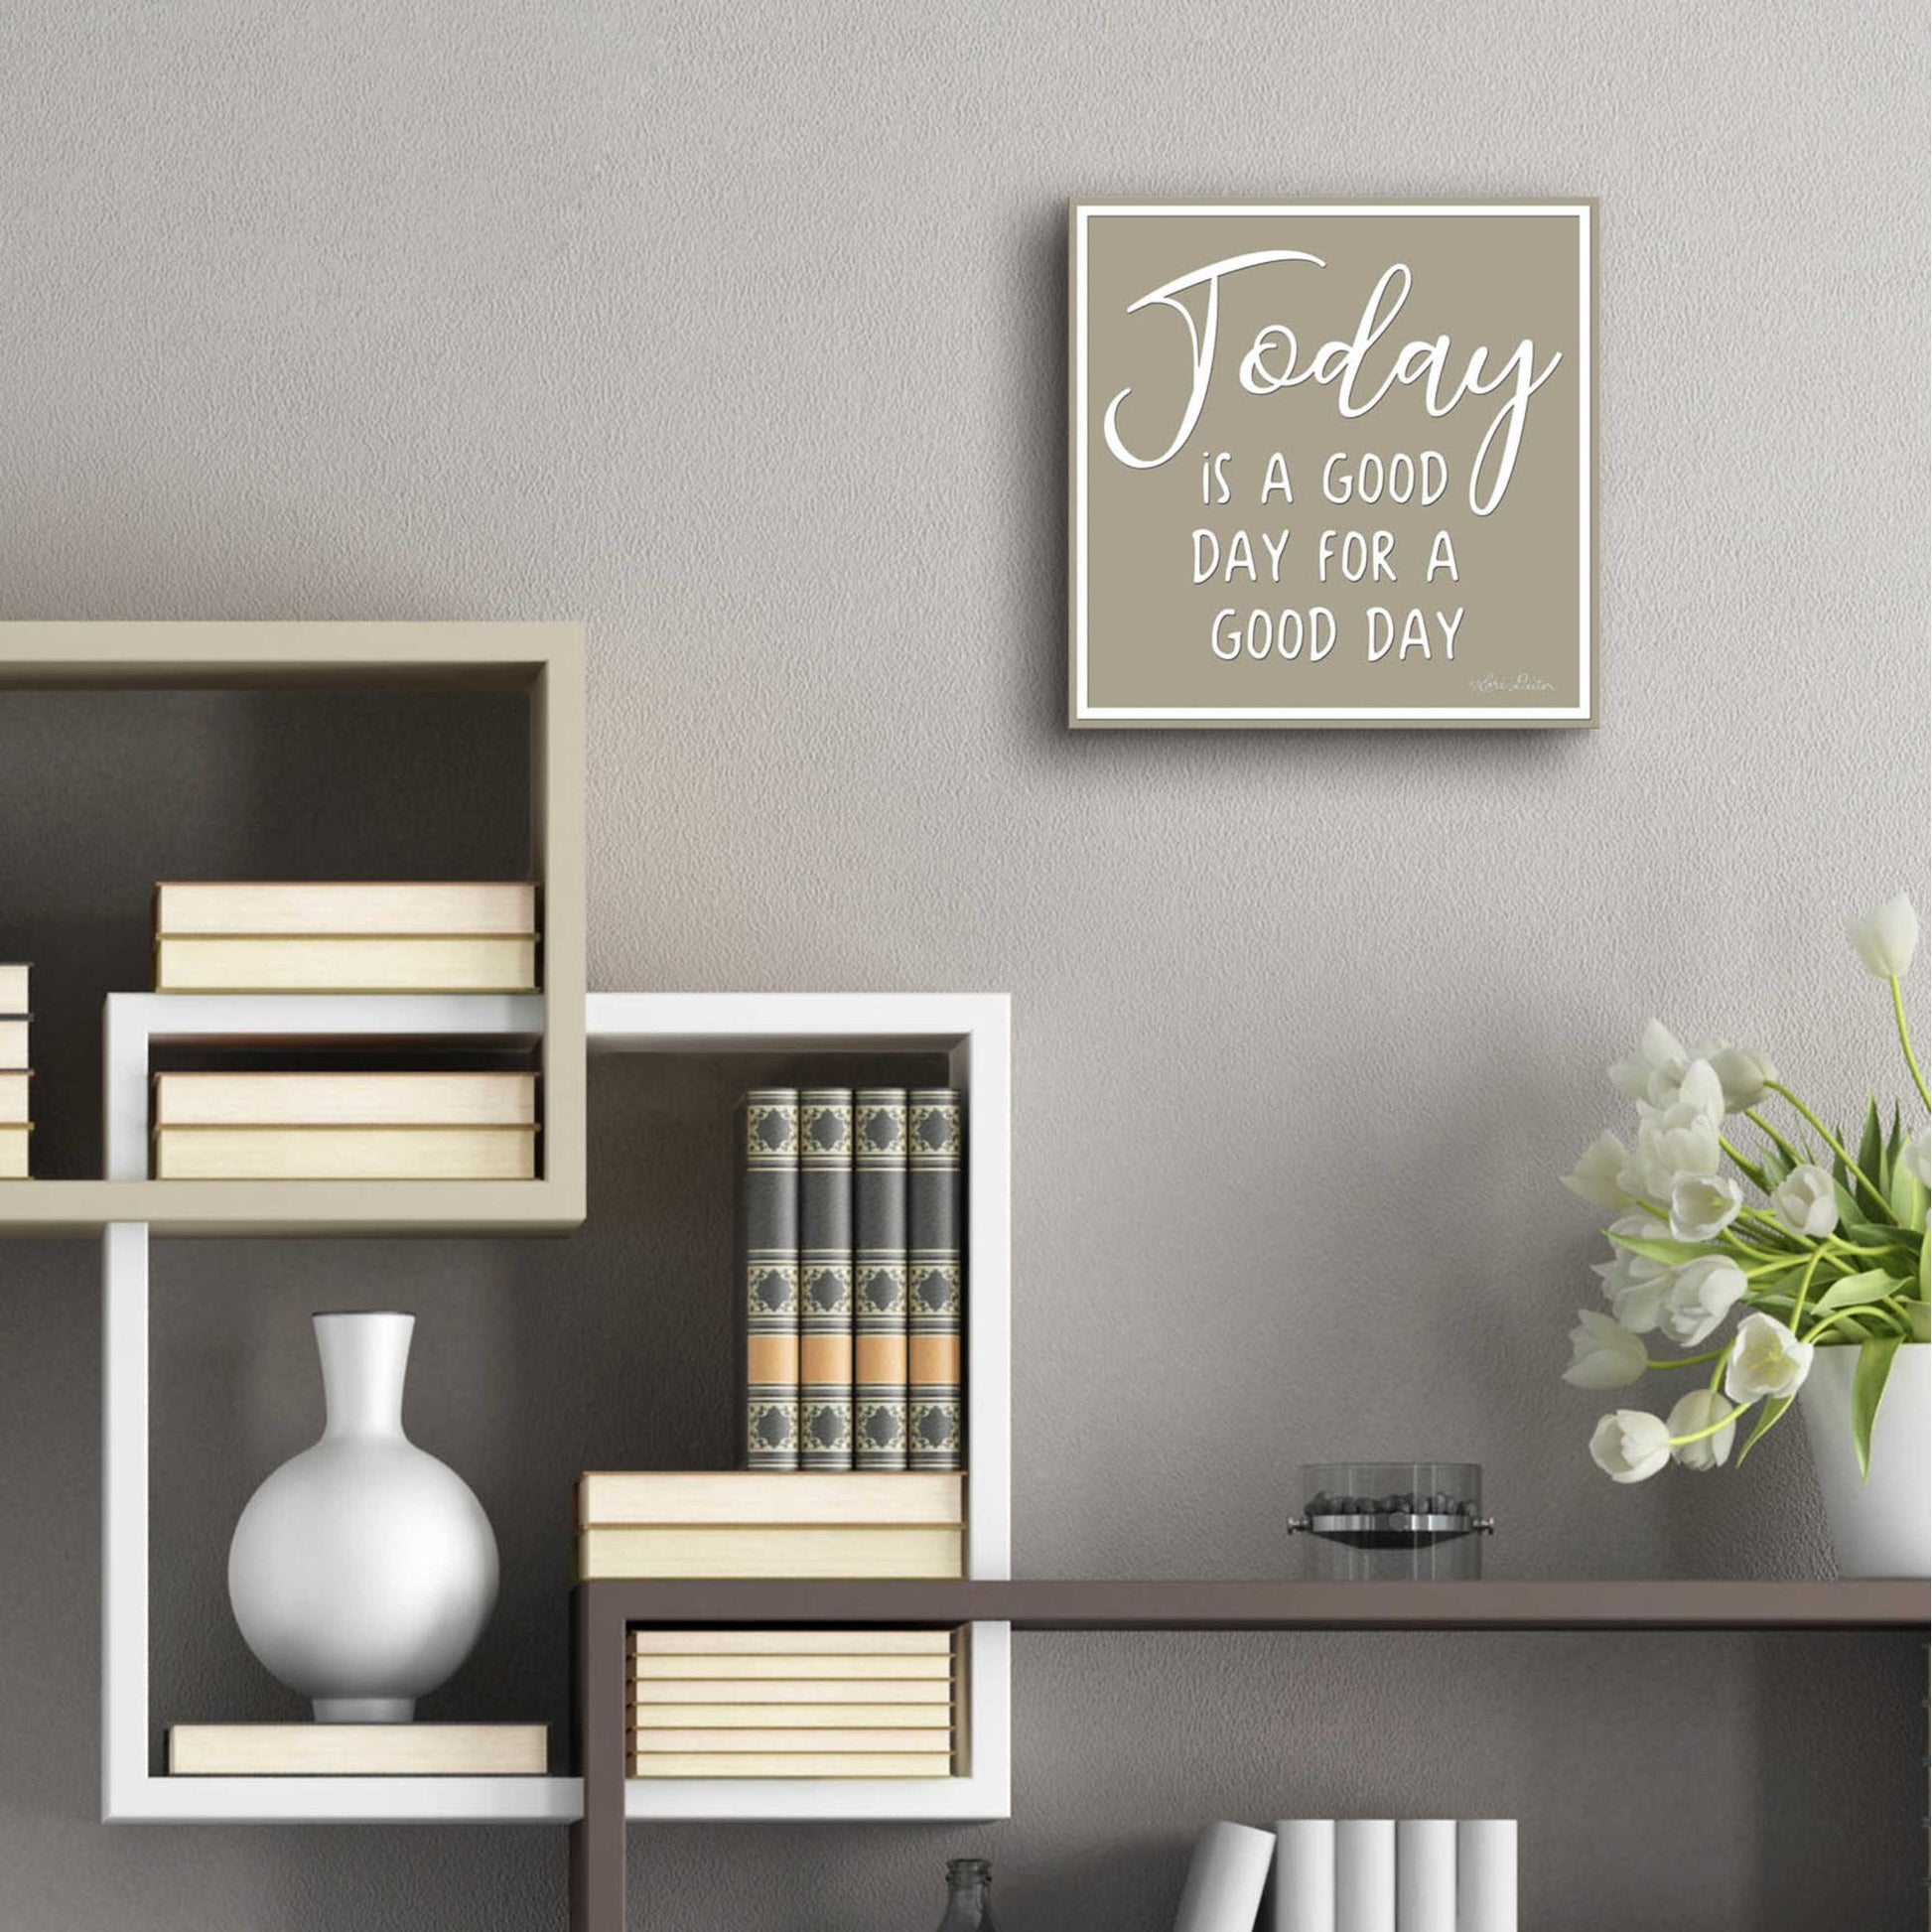 Epic Art 'Today is a Good Day' by Lori Deiter, Acrylic Glass Wall Art,12x12